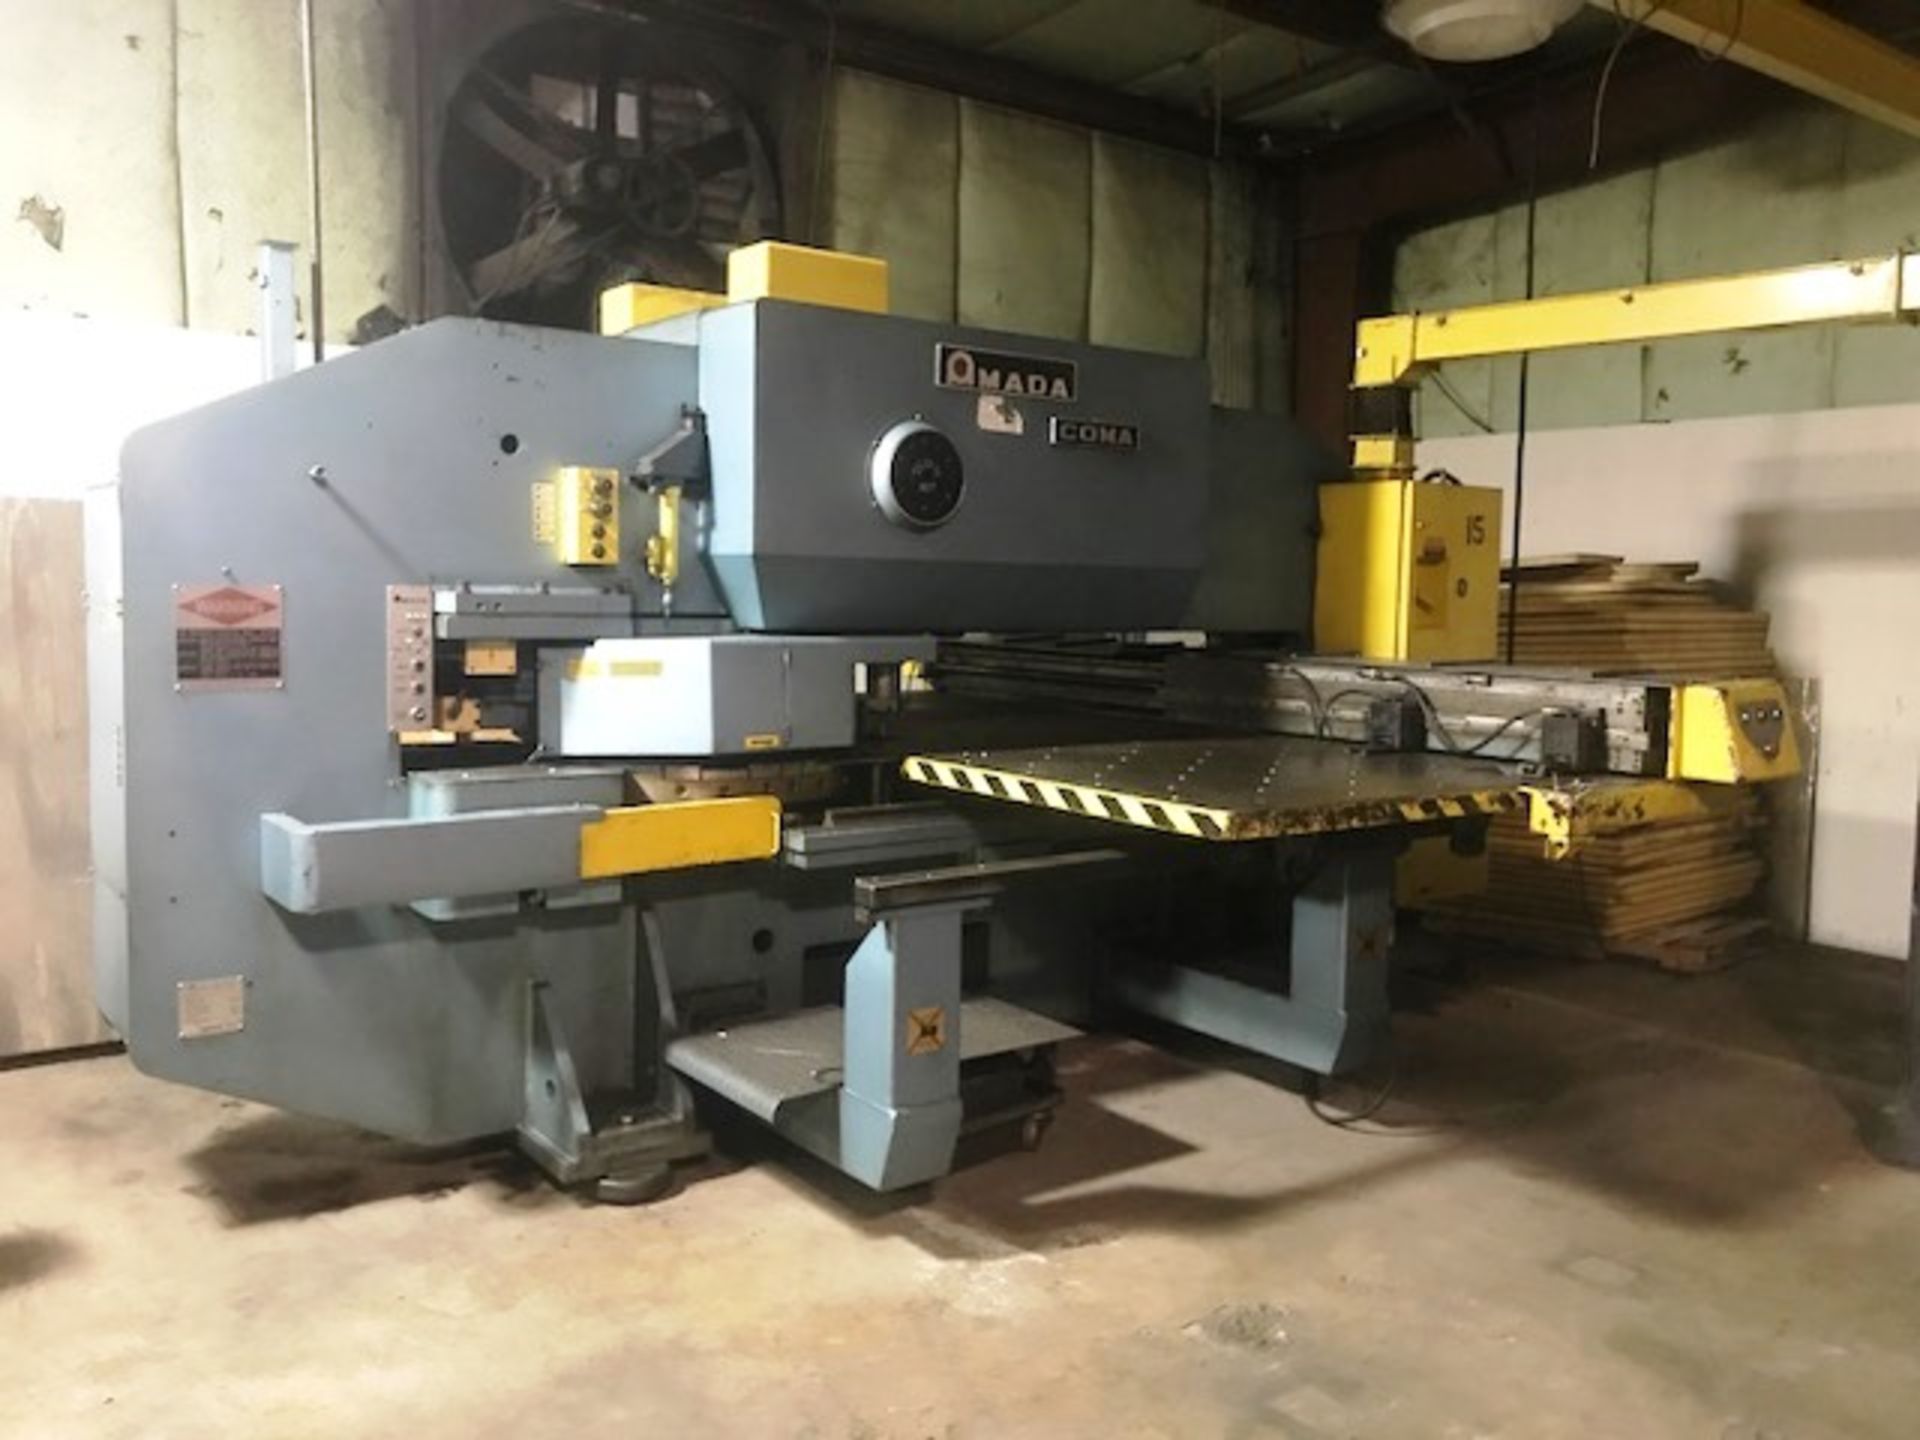 Amada Coma 505072 50 Ton CNC Turret Punch with 48 Station Turret, Approx. 60'' x 138'' Ball Transfer - Image 4 of 4